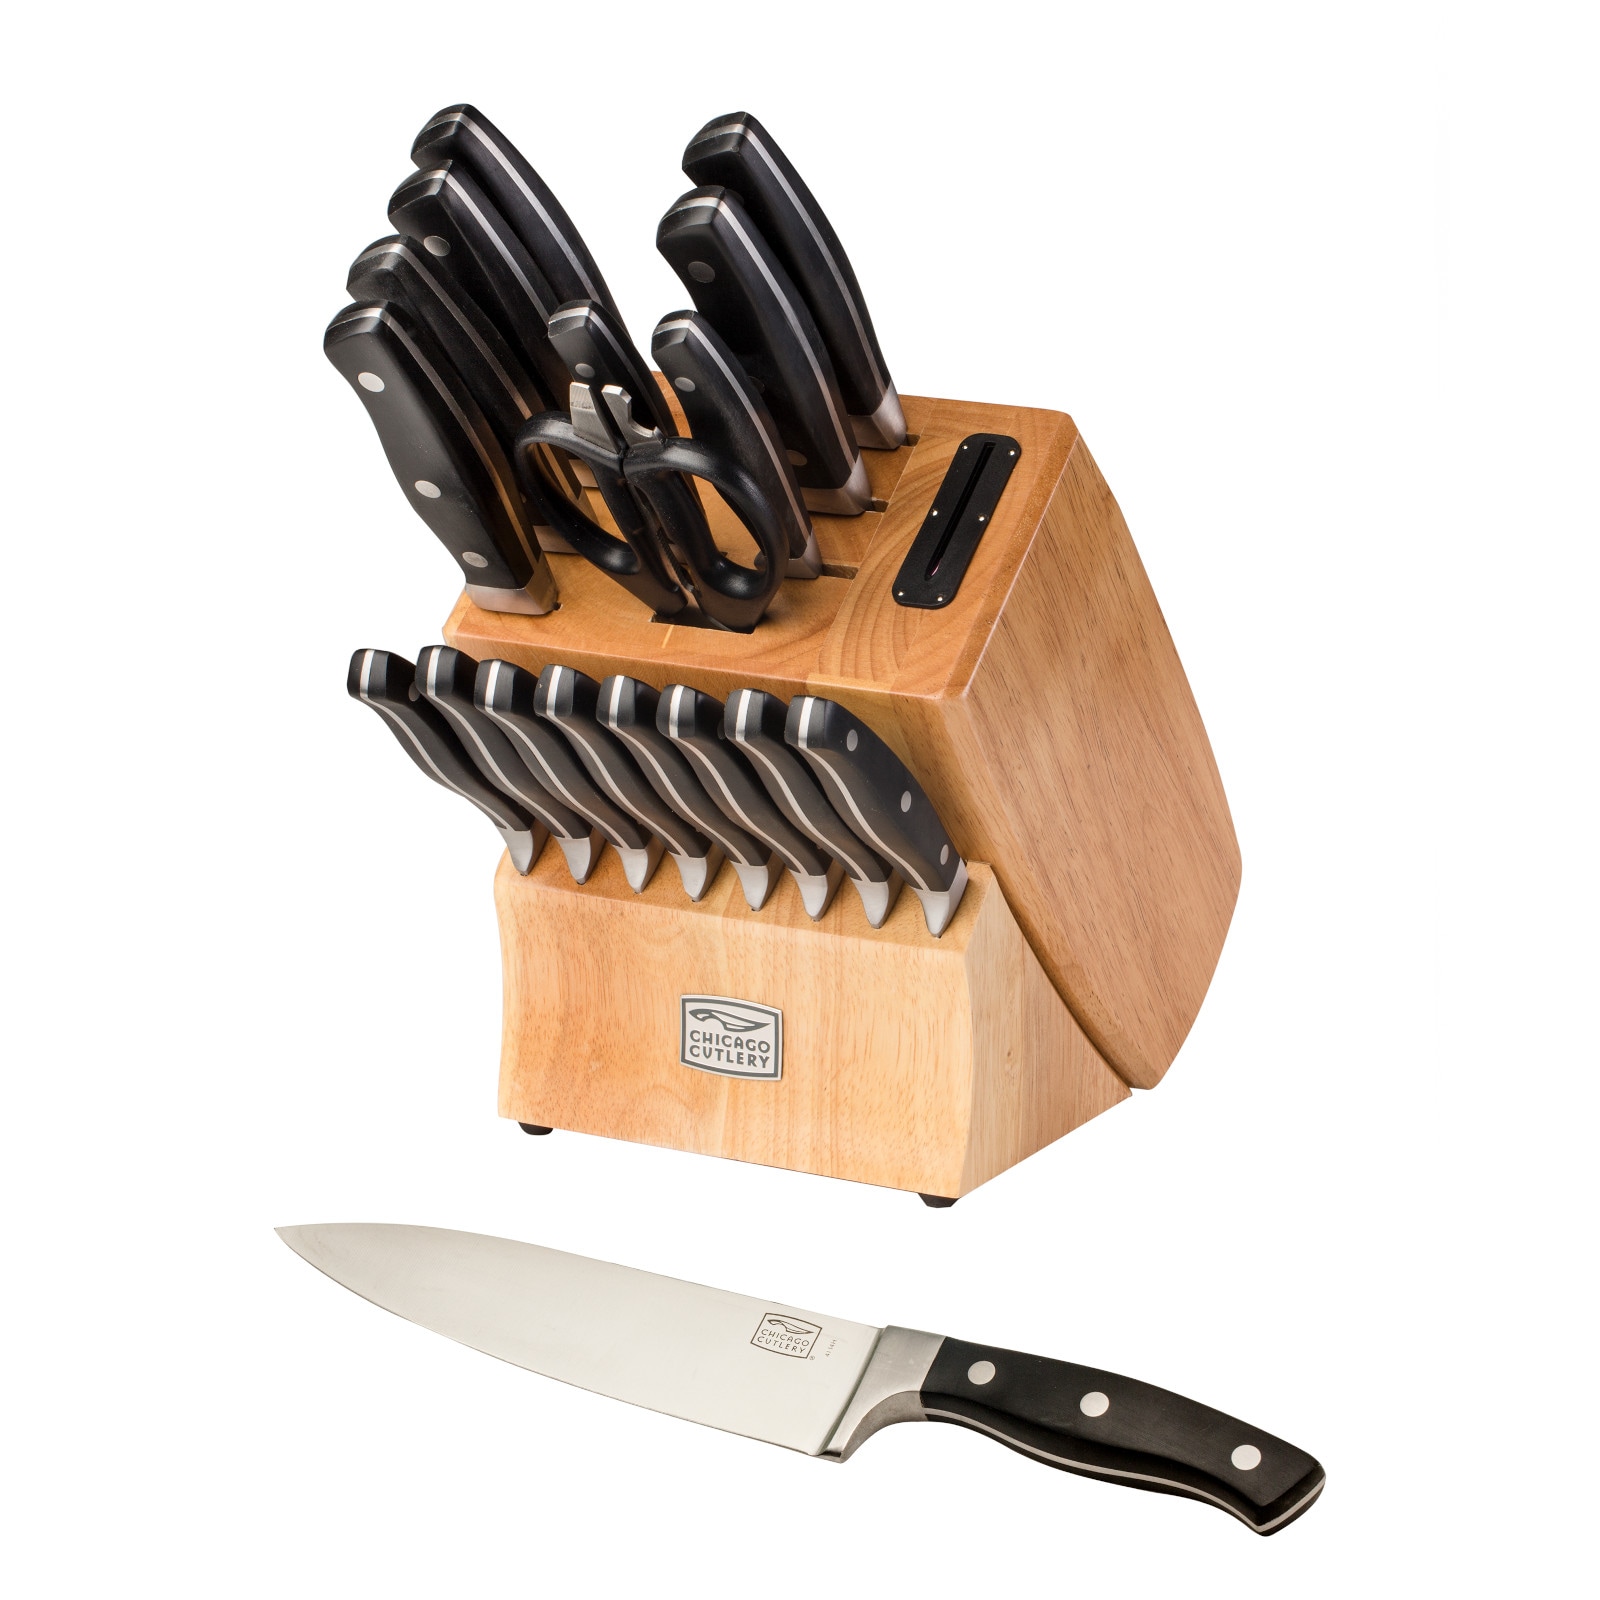 Chicago Cutlery Elston 16-Piece Kitchen Knife Set with Wood Block